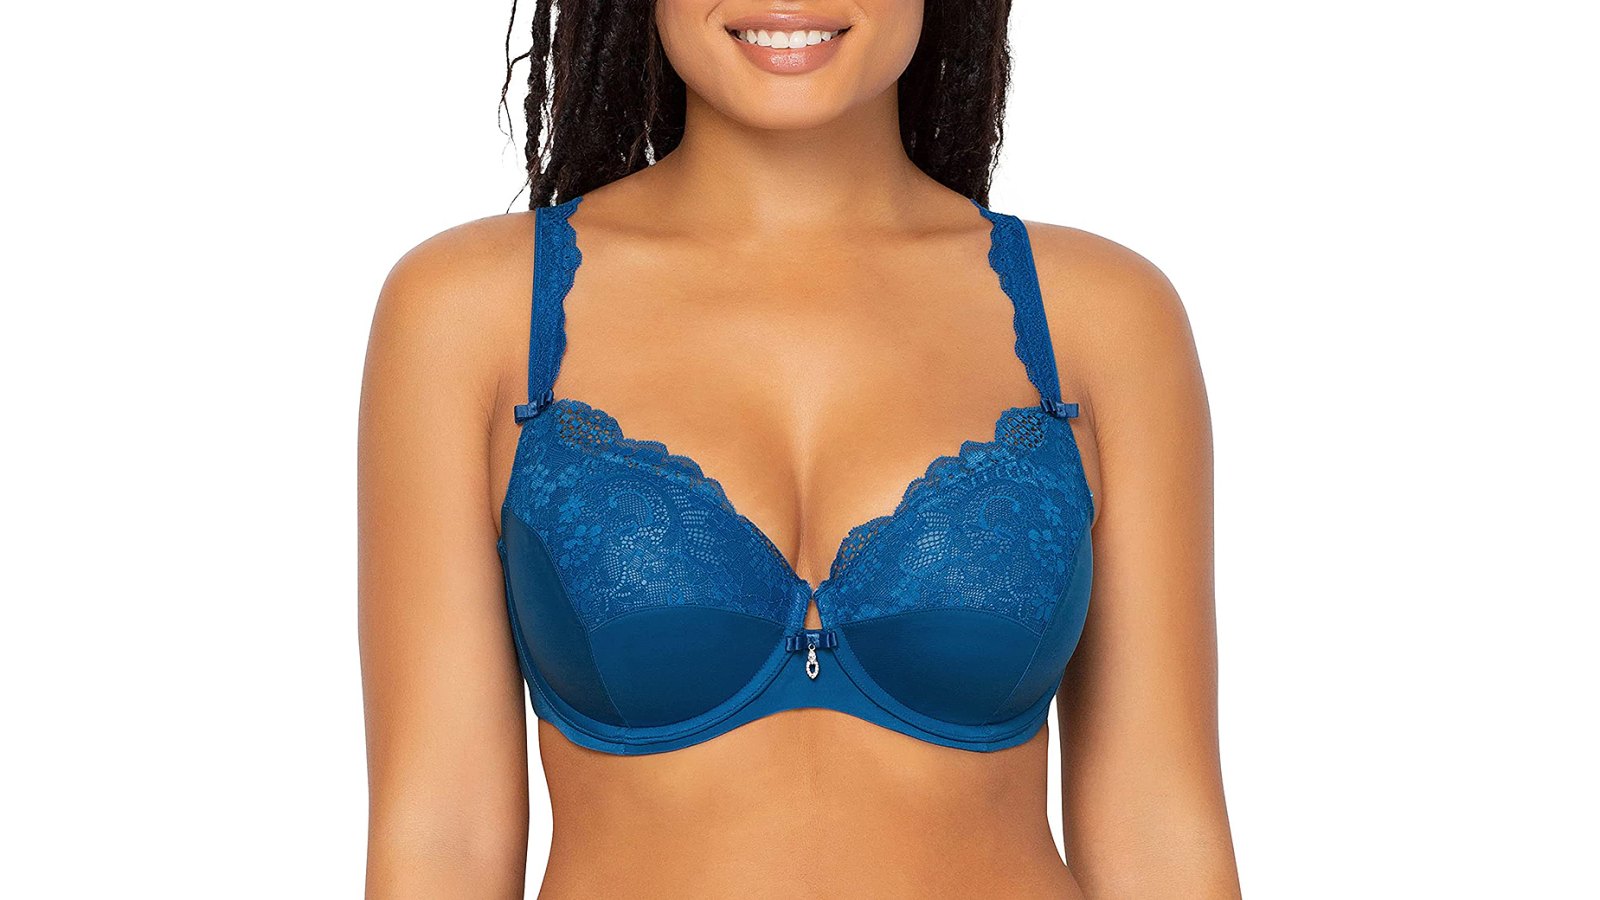 Curvy Couture Lace Push-Up Bra Is a Must for Fuller Figures